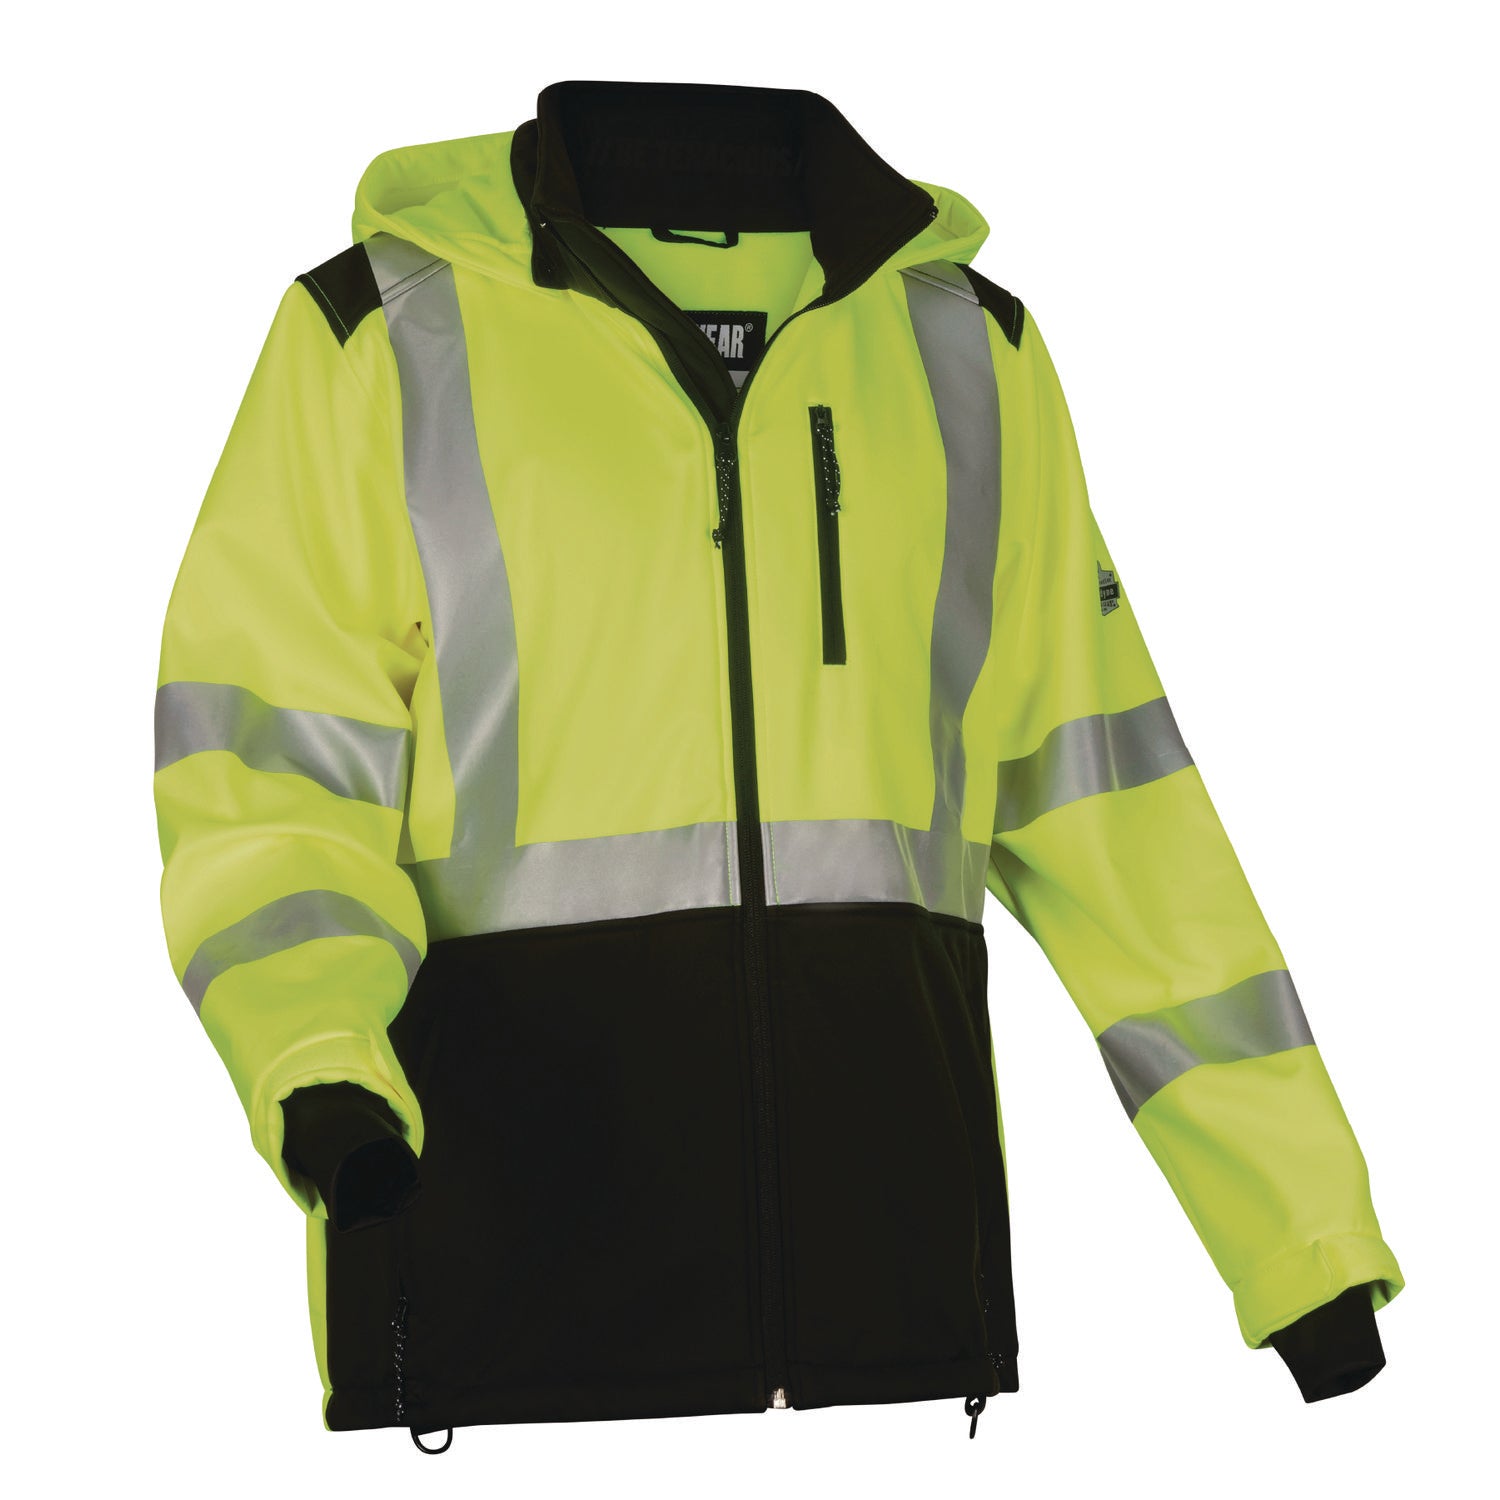 glowear-8353-class-3-hi-vis-softshell-water-resistant-jacket-4x-large-lime-ships-in-1-3-business-days_ego23528 - 1